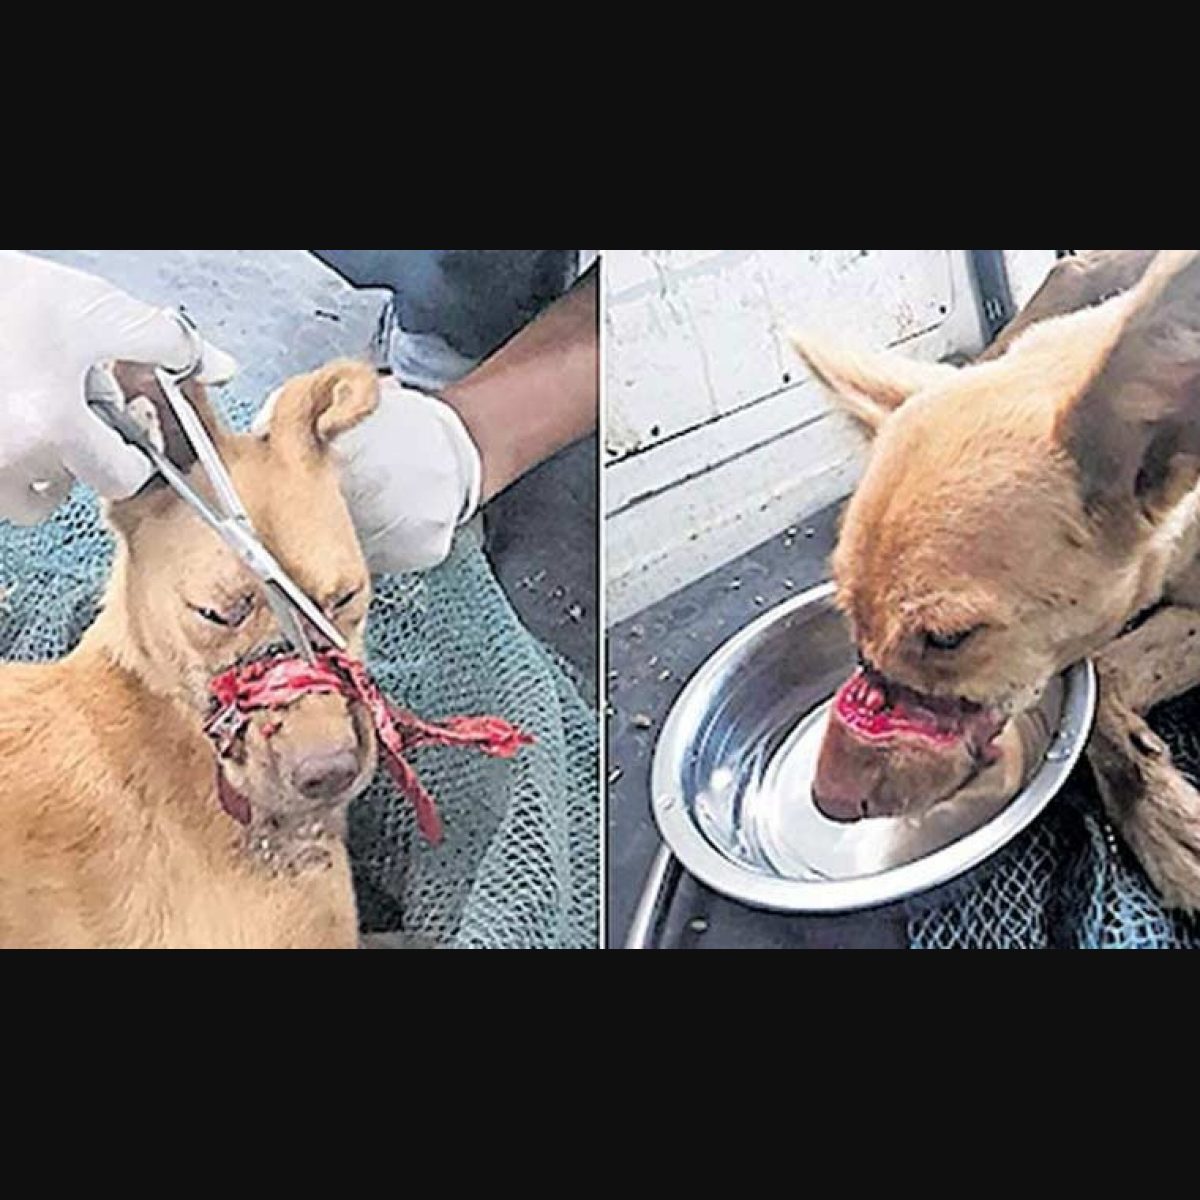 Kerala: Dog with its mouth sealed by tape for 2 weeks rescued - The Week